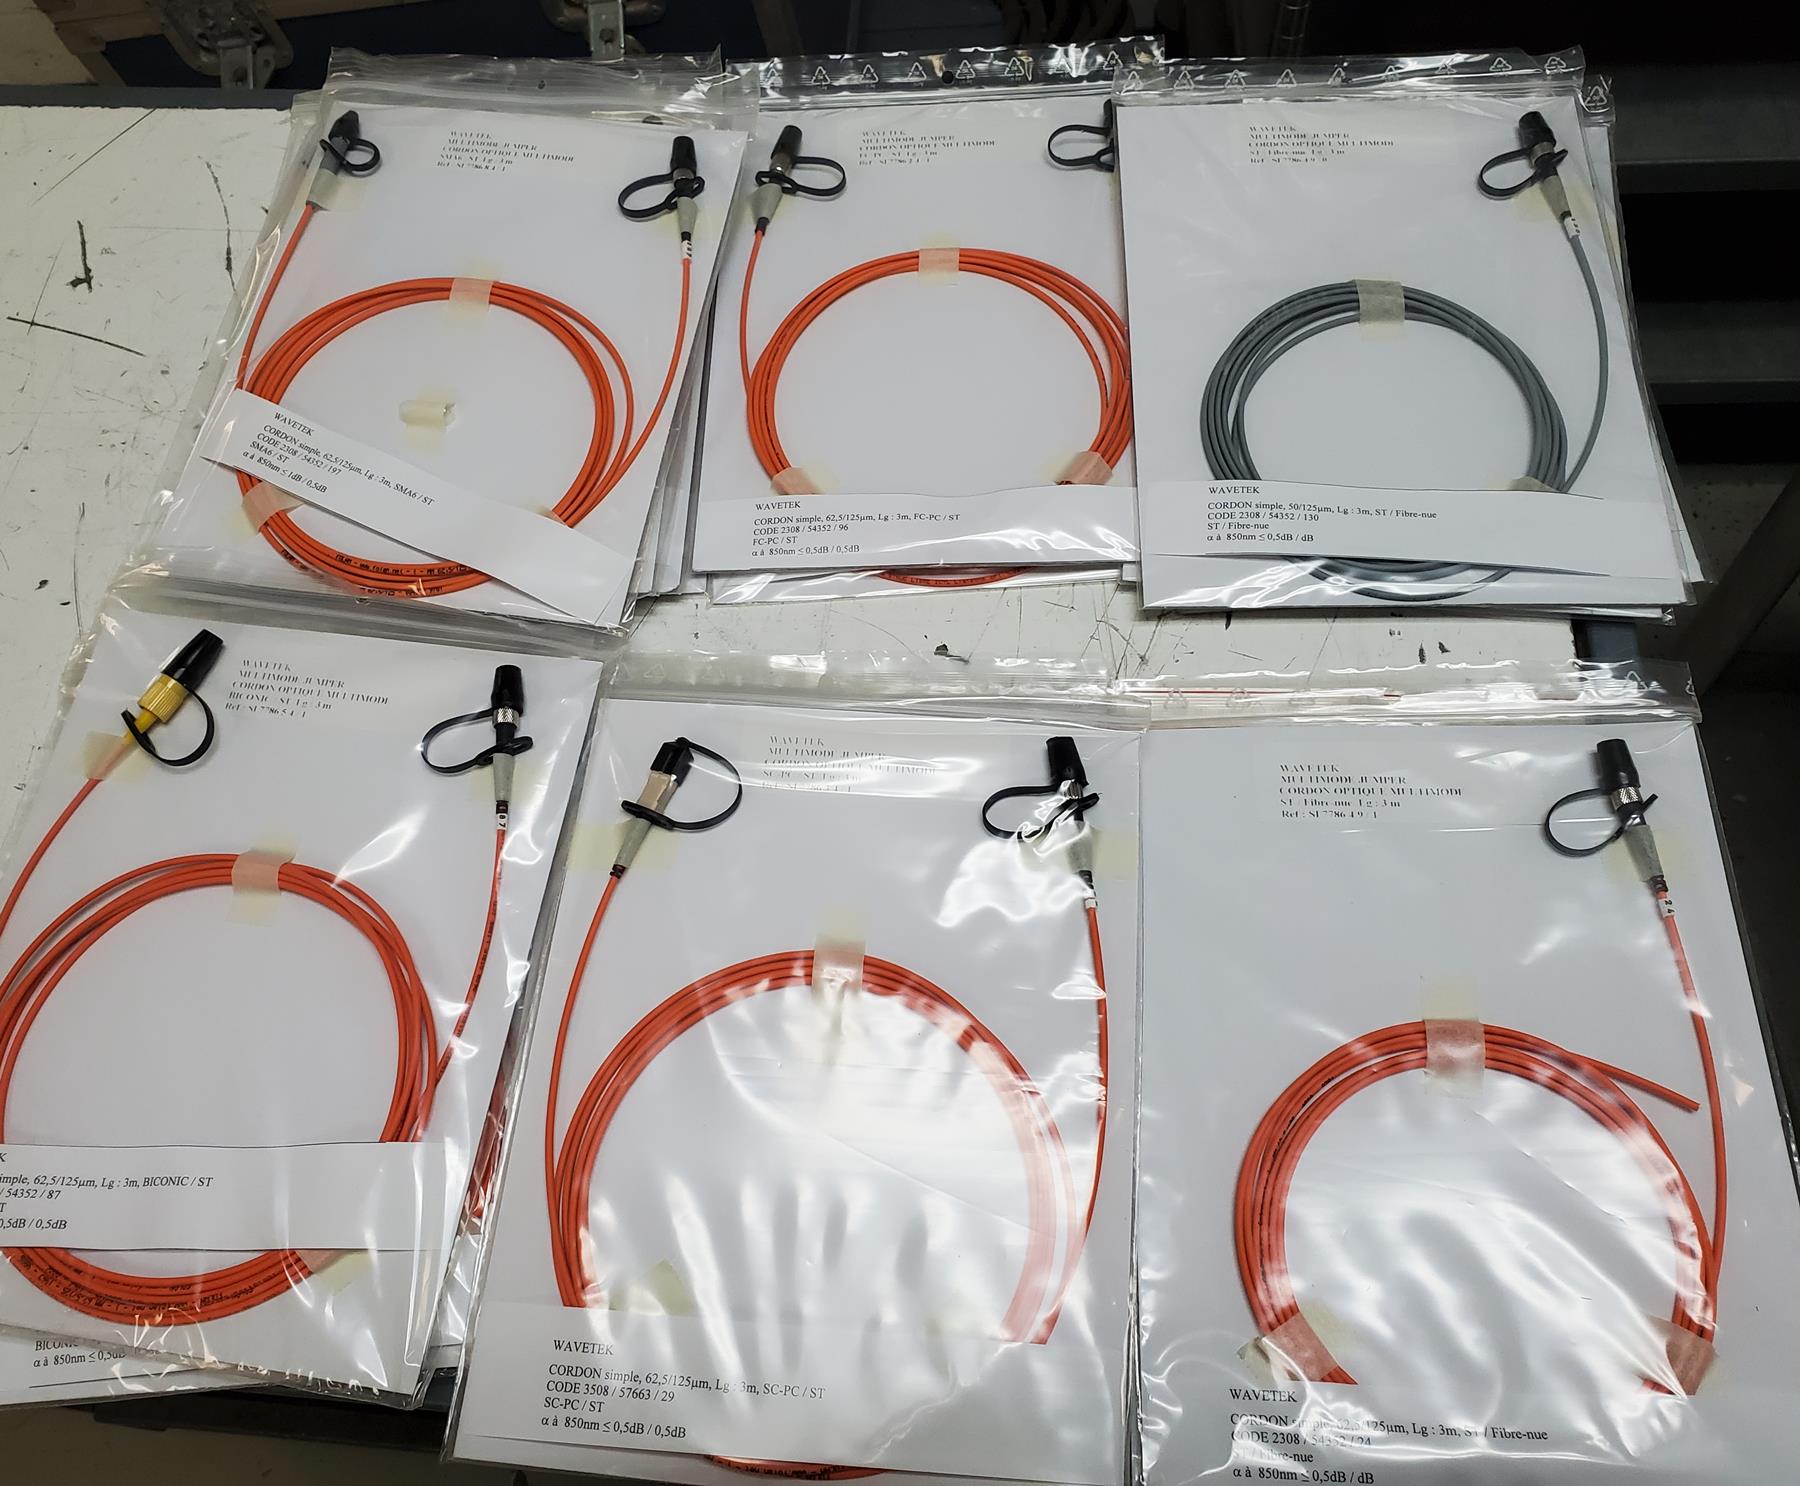 AccuSource mixed multimode patchcords just arrived